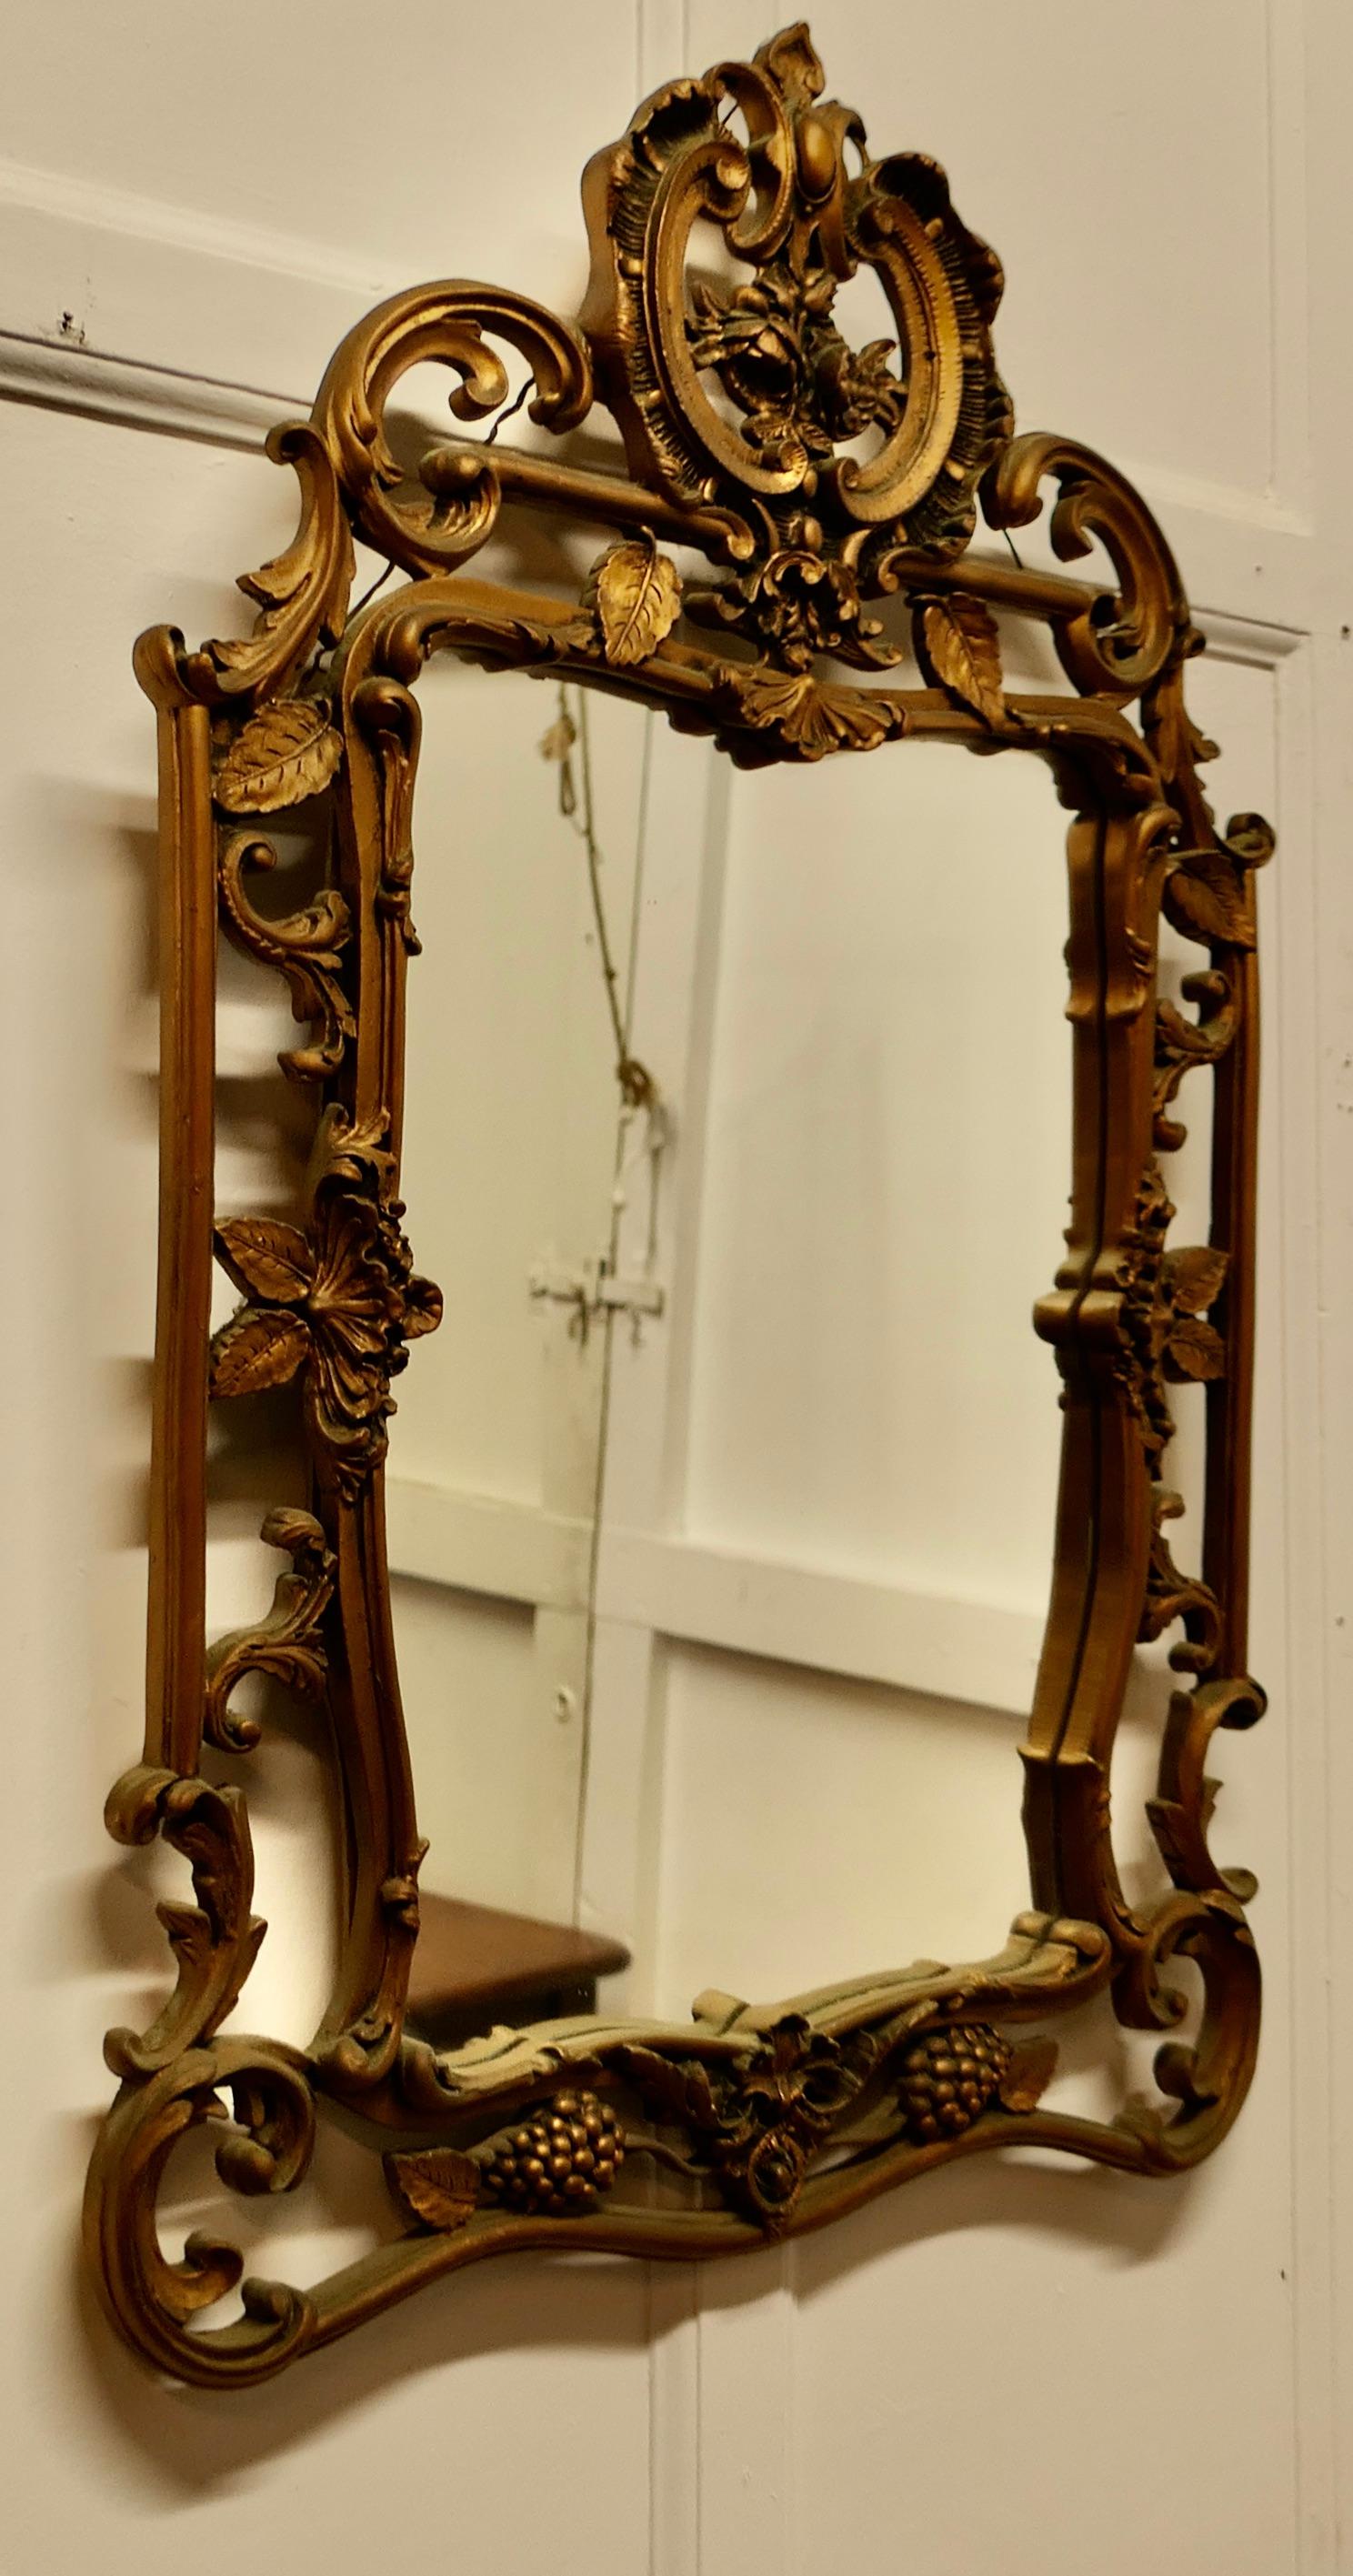 Elaborate Atsonea Rococo Gilt Wall Mirror

The Mirror is decorated in the Rococo style with a Wide Pierced Gilt Frame, it has a large scroll design to the top
The mirror glass is original and in good condition with little or no foxing 
The Mirror is